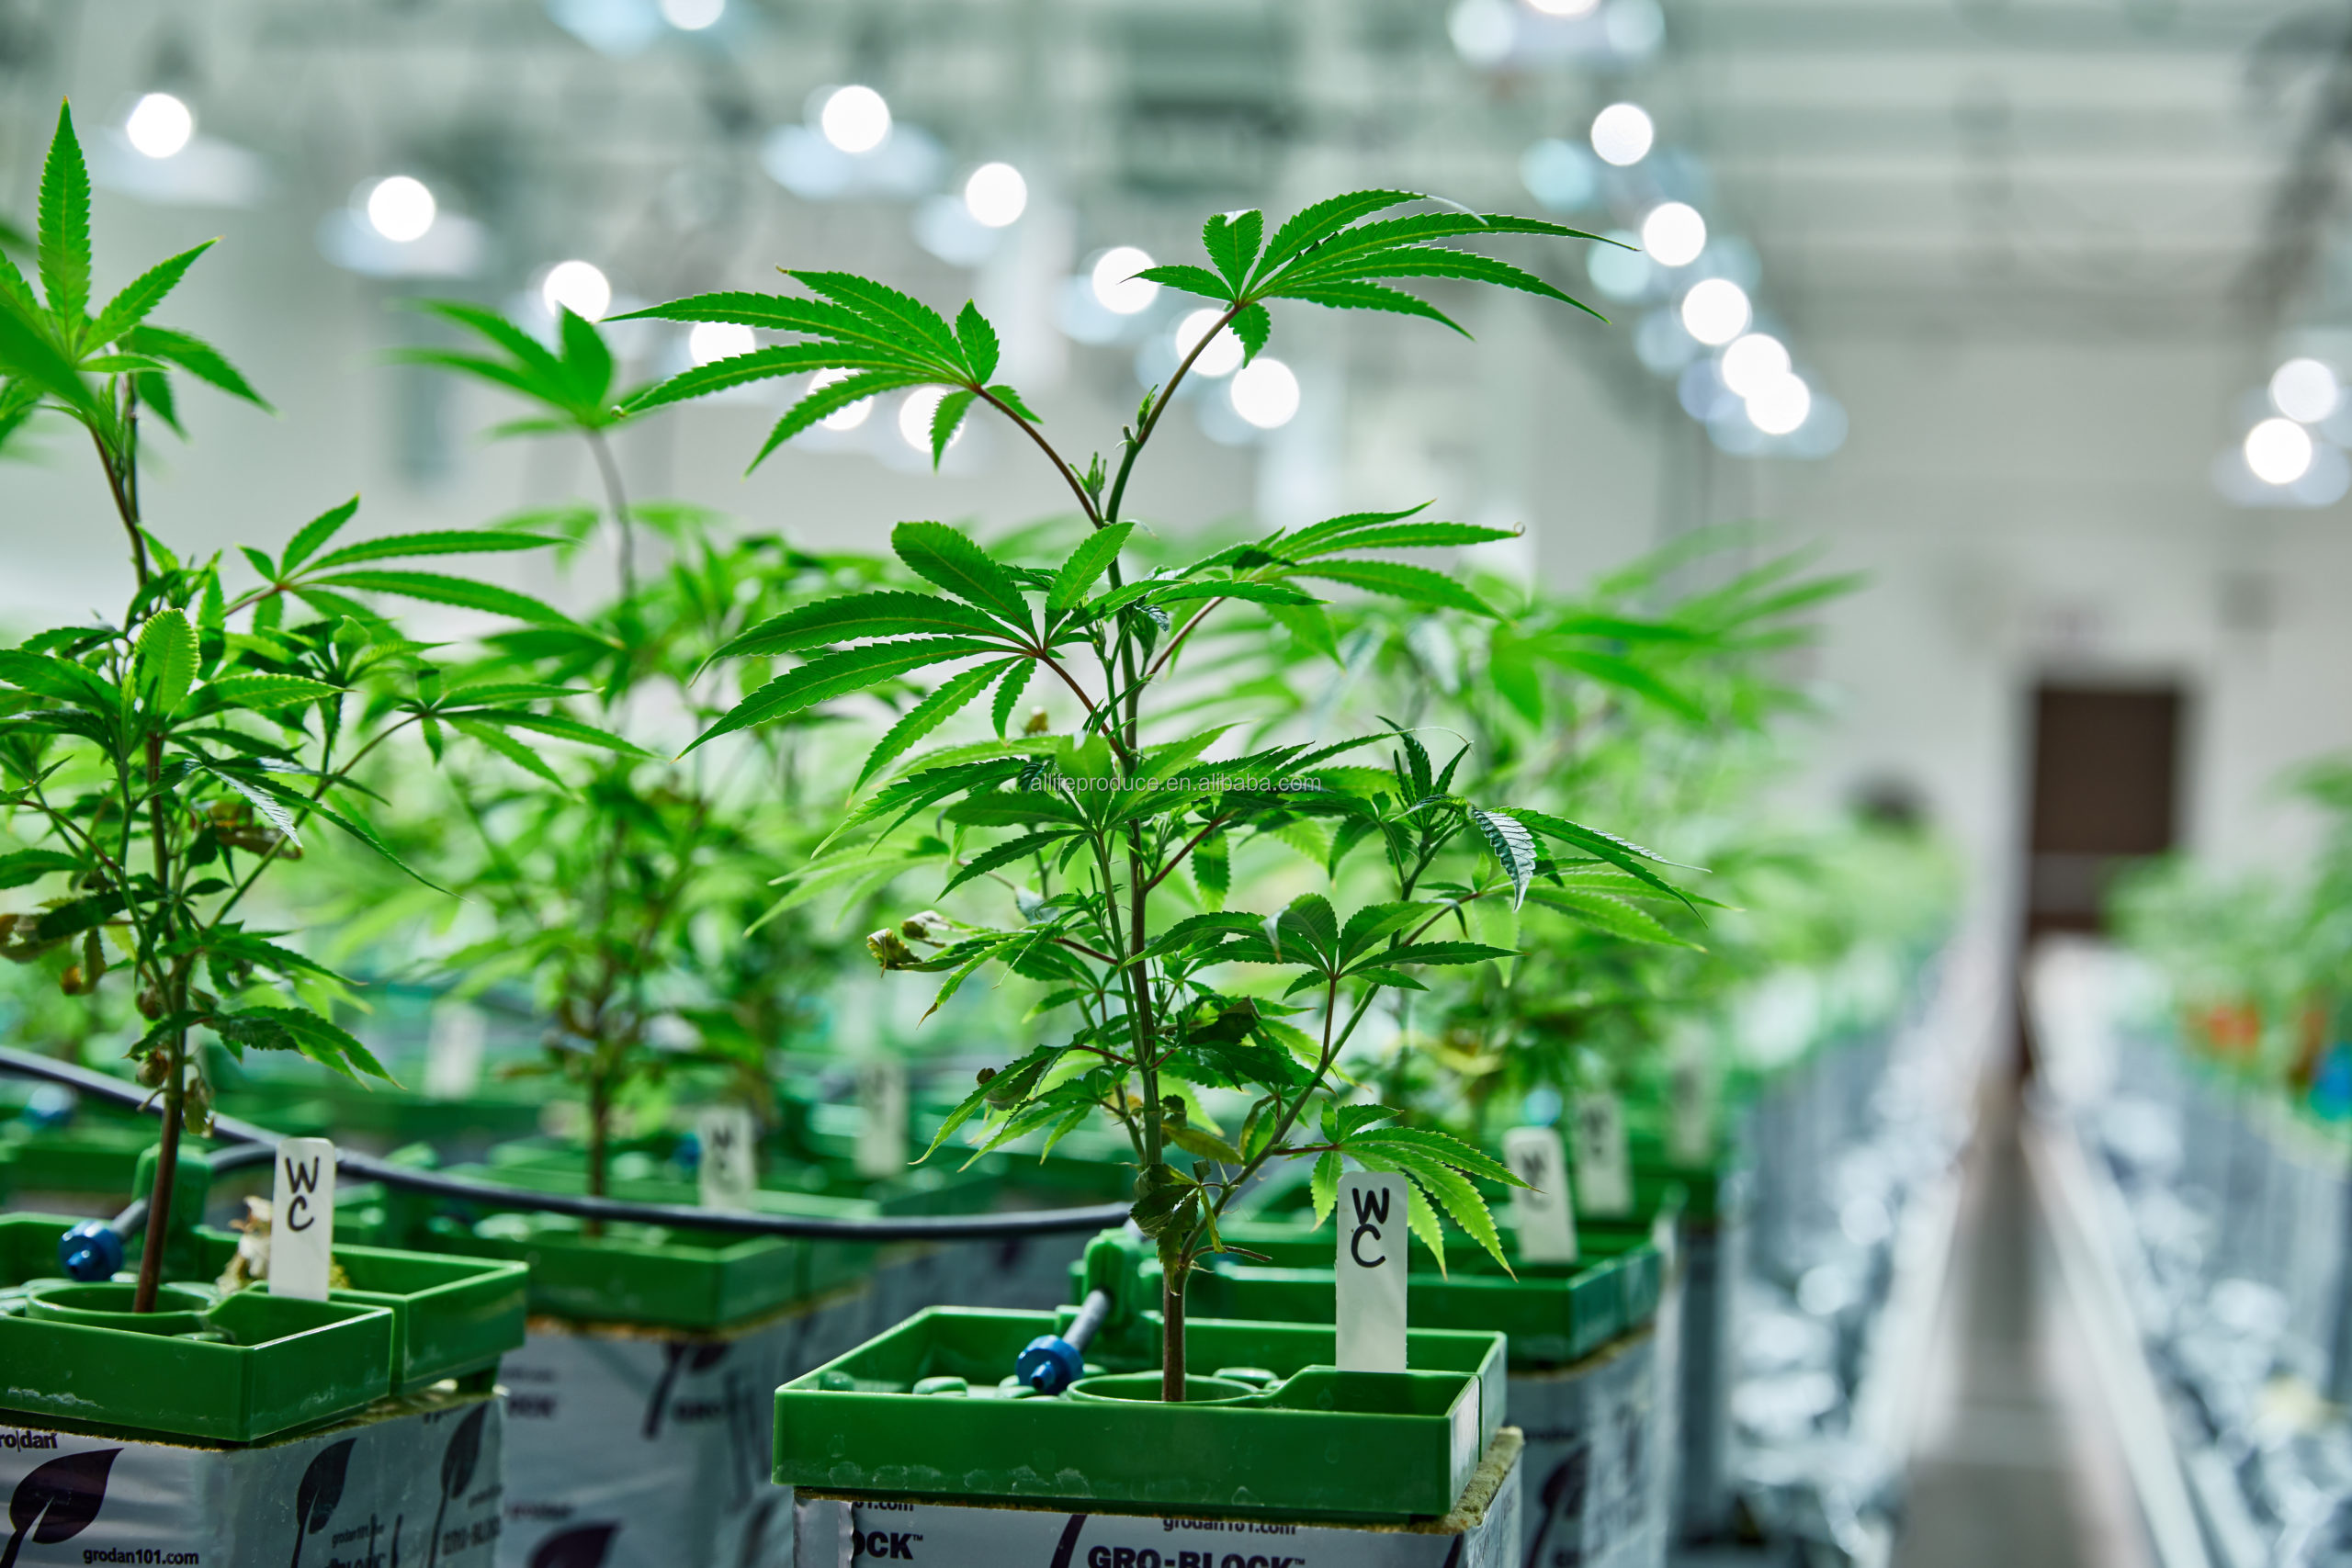 Several factors affecting the growth of indoor cannabis cultivation